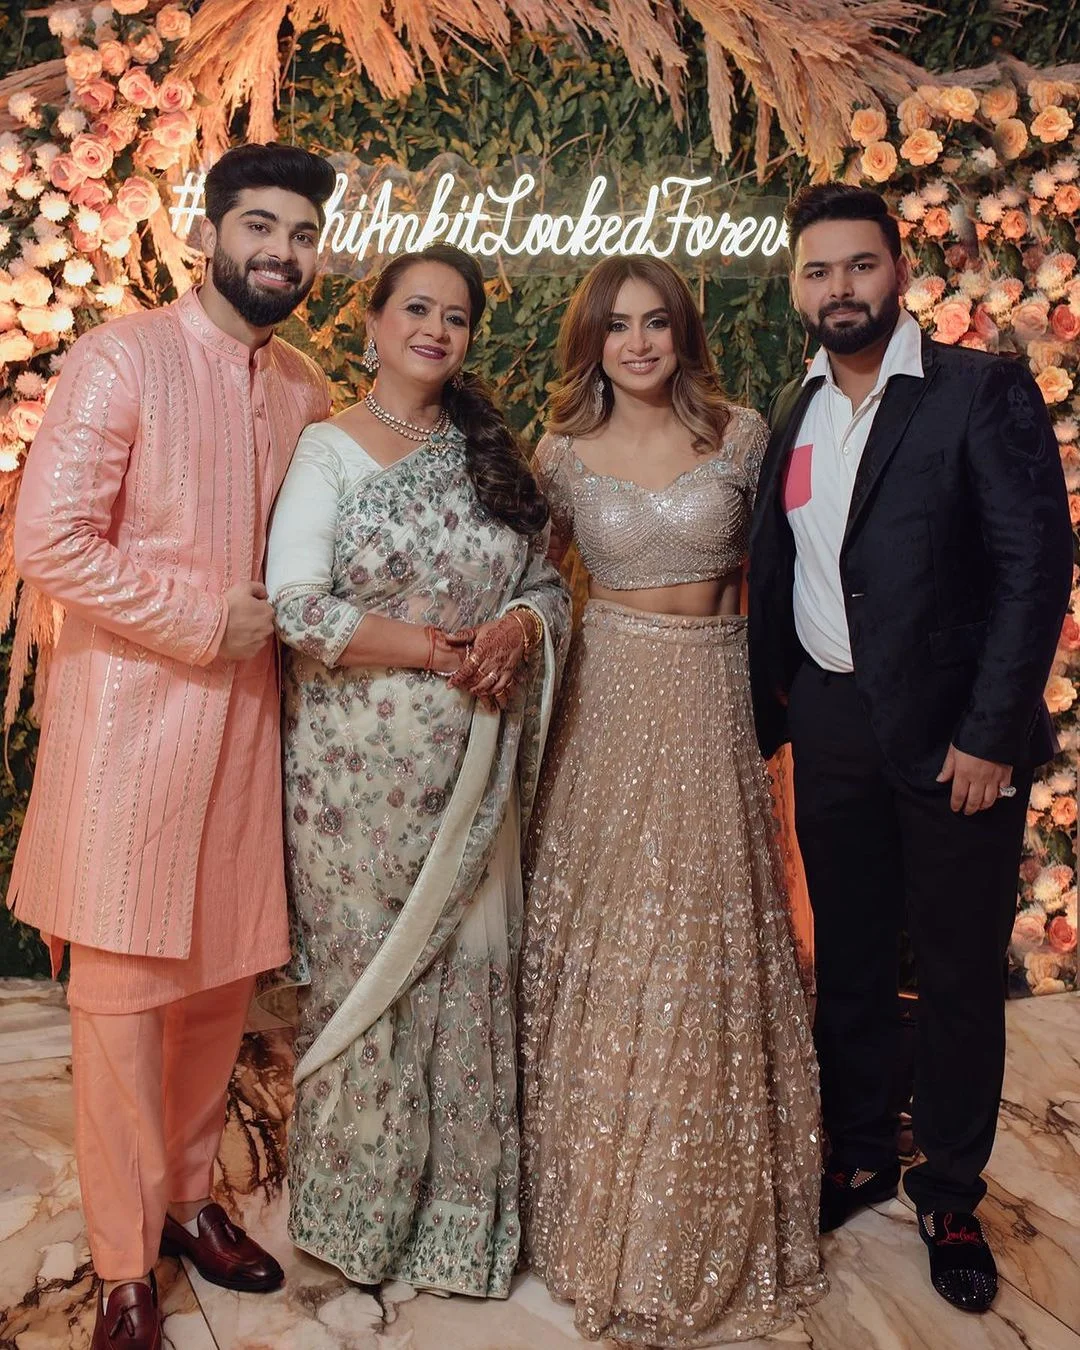 Rishabh Pant with sister, mother and soon to be brother-in-law